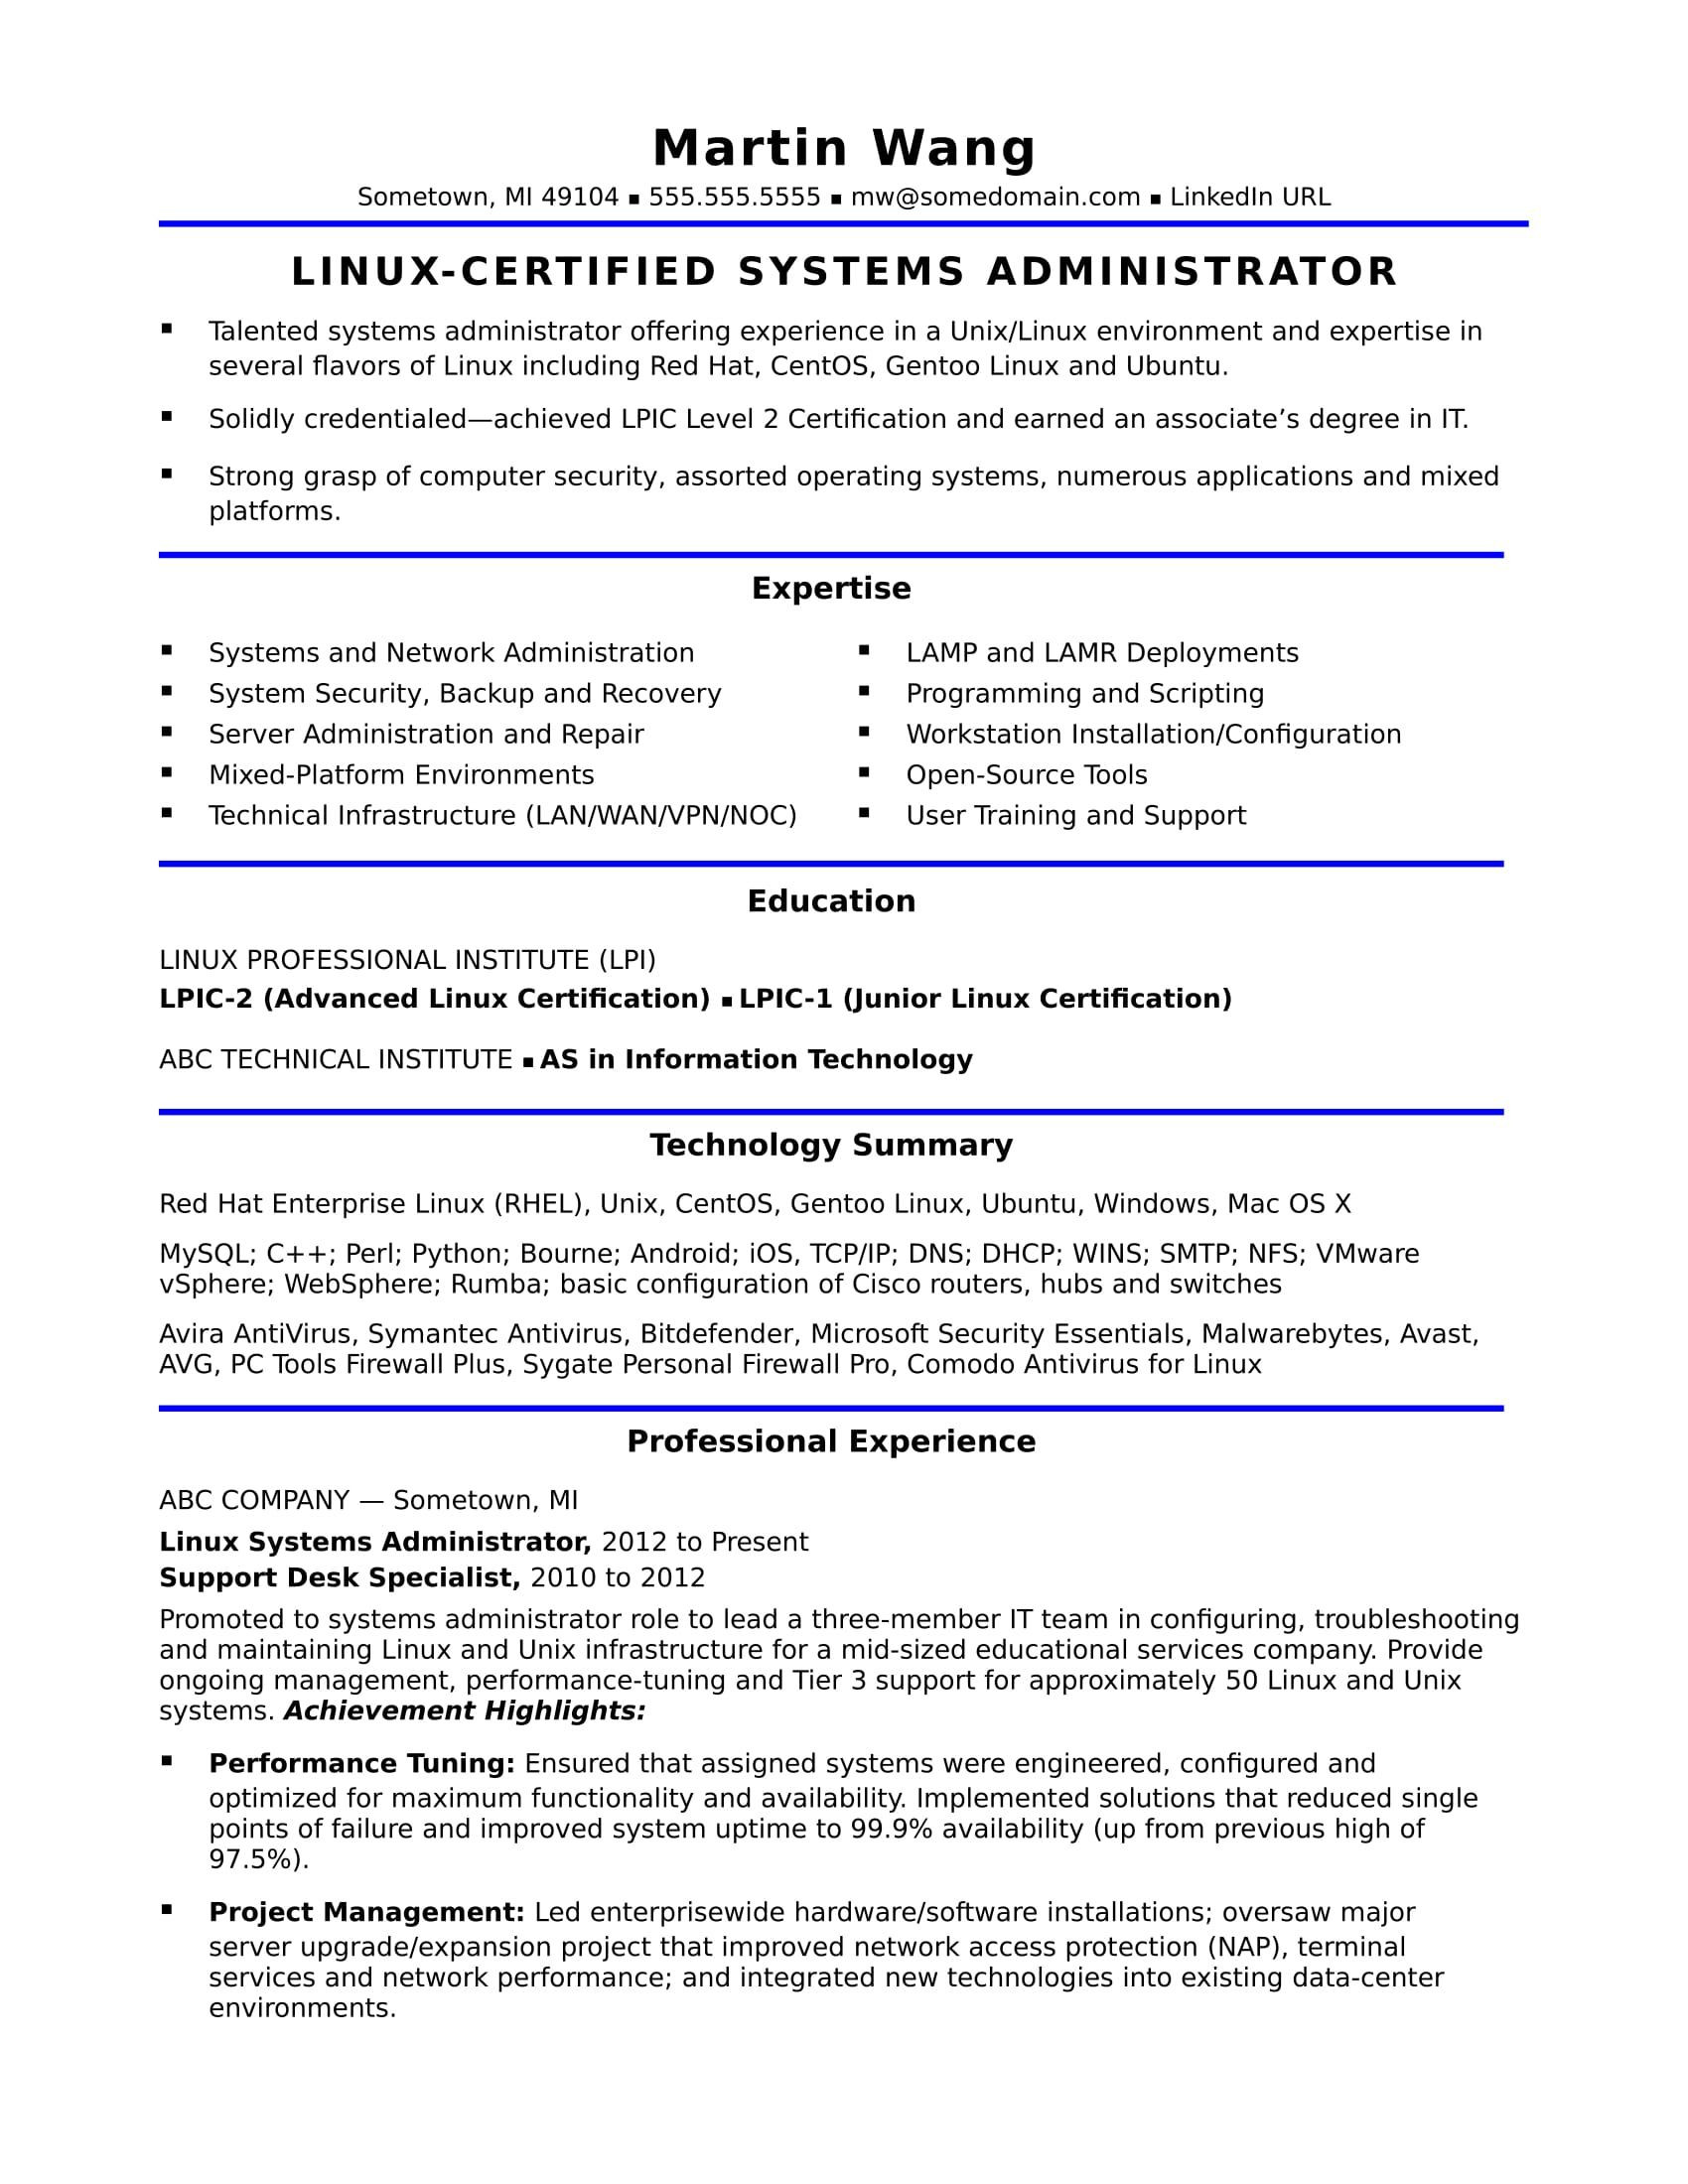 Linux Admin Resume Sample for Freshers See This Sample Resume for A Midlevel Systems Adminstrator for …